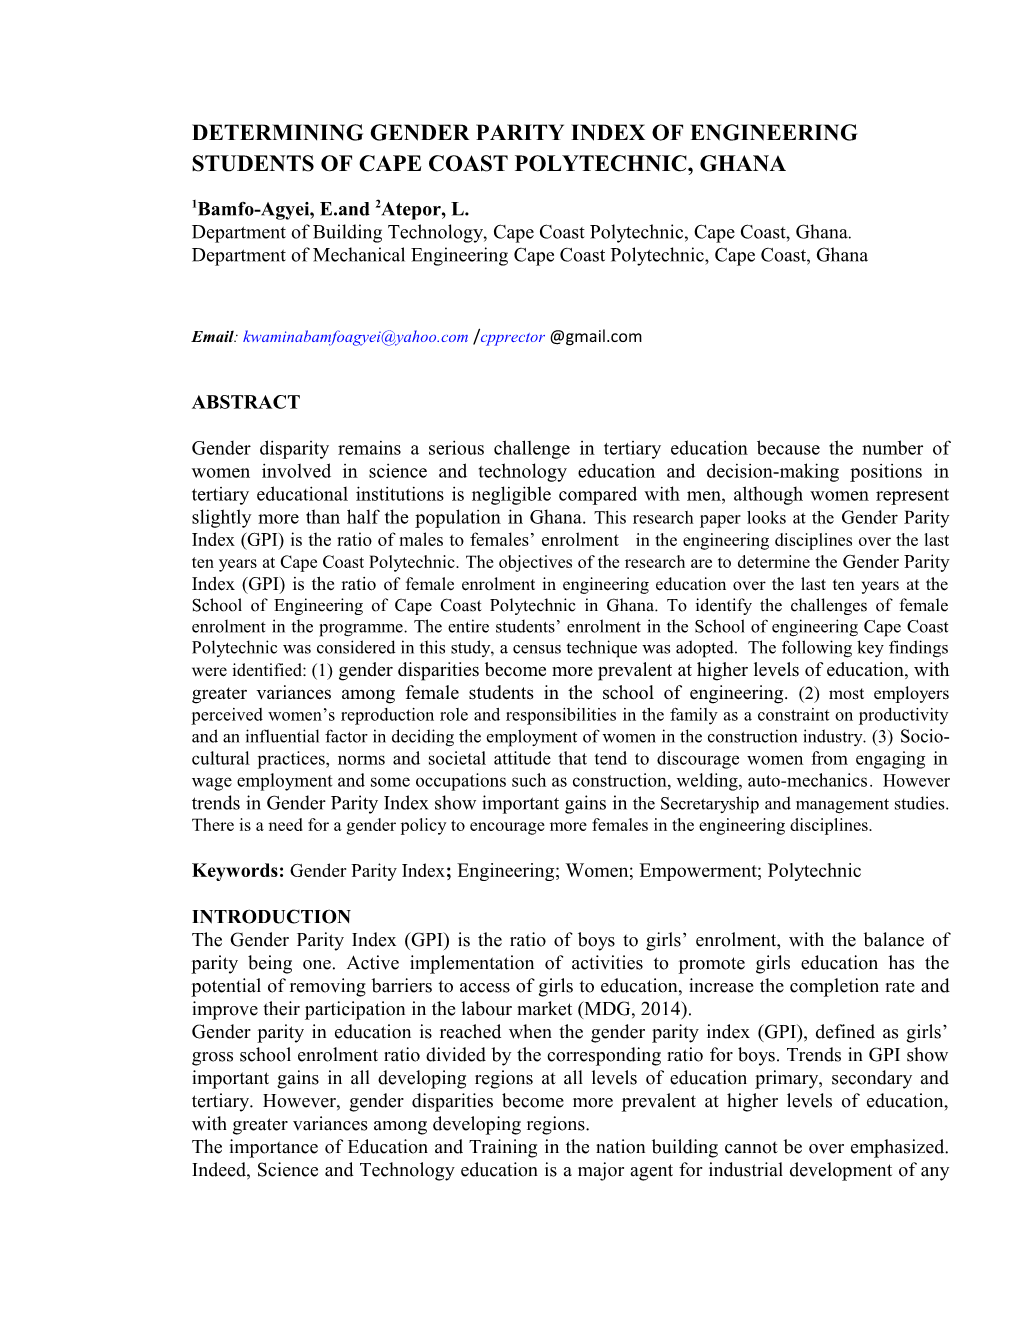 Determining Gender Parity Index of Engineering Students of Cape Coast Polytechnic, Ghana